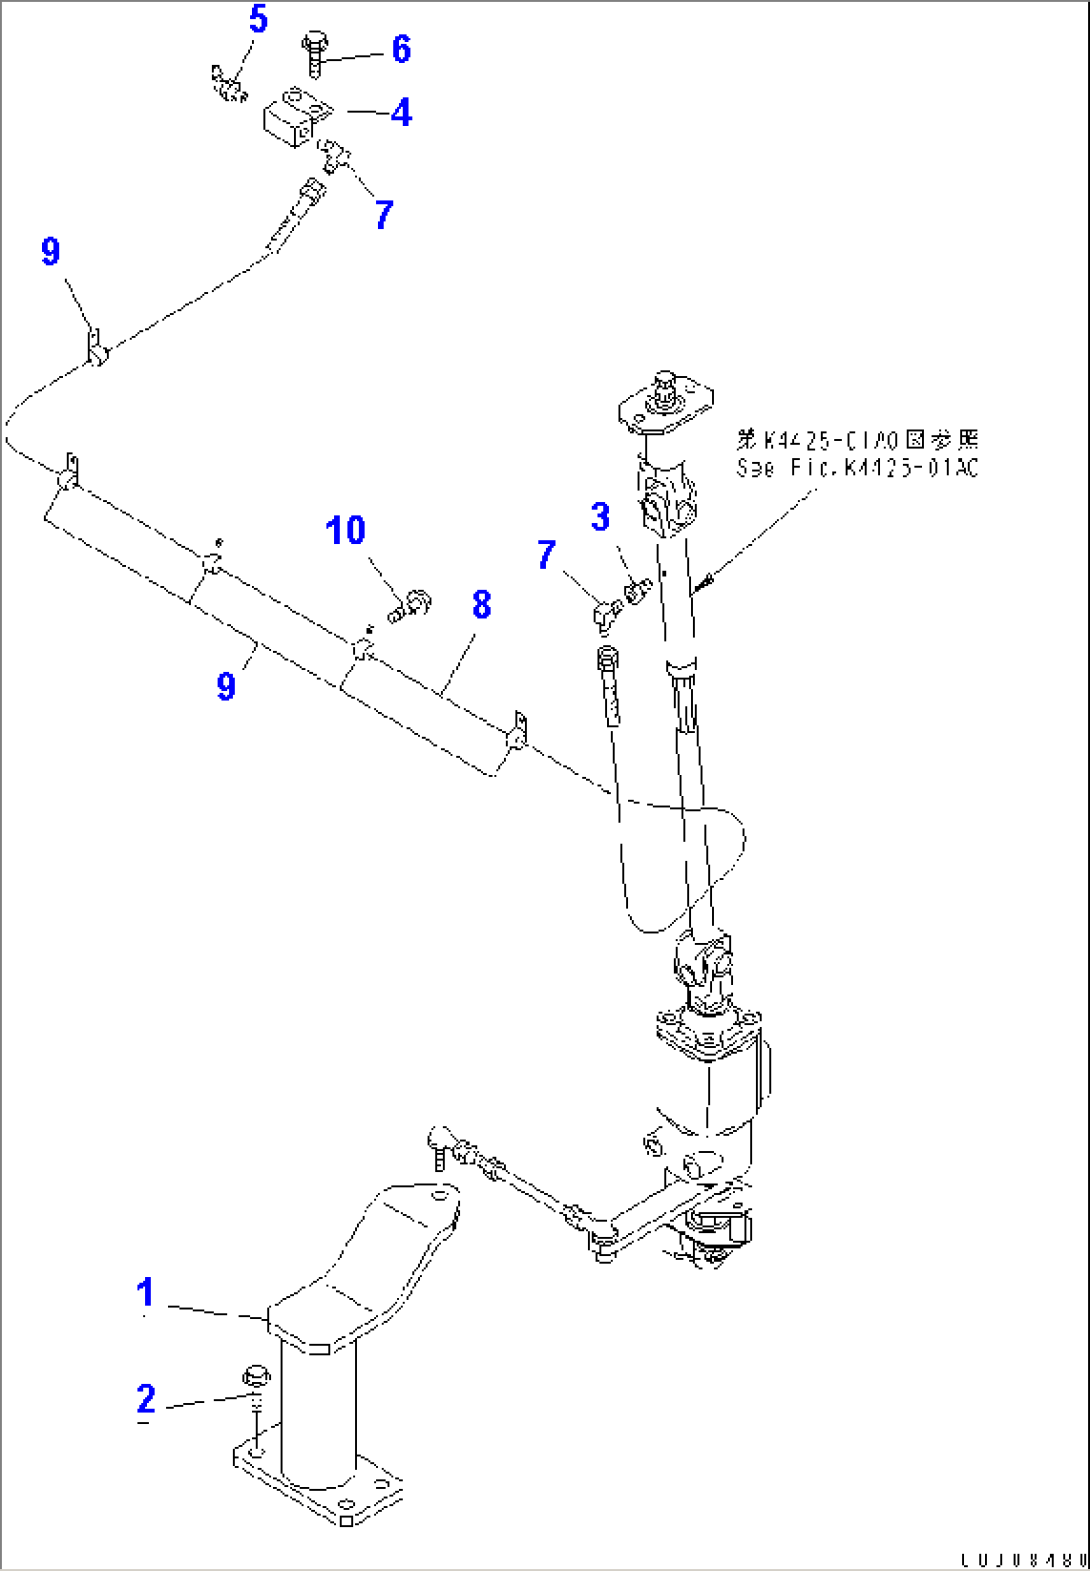 STEERING AND TRANSMISSION CONTROL (LINKAGE)